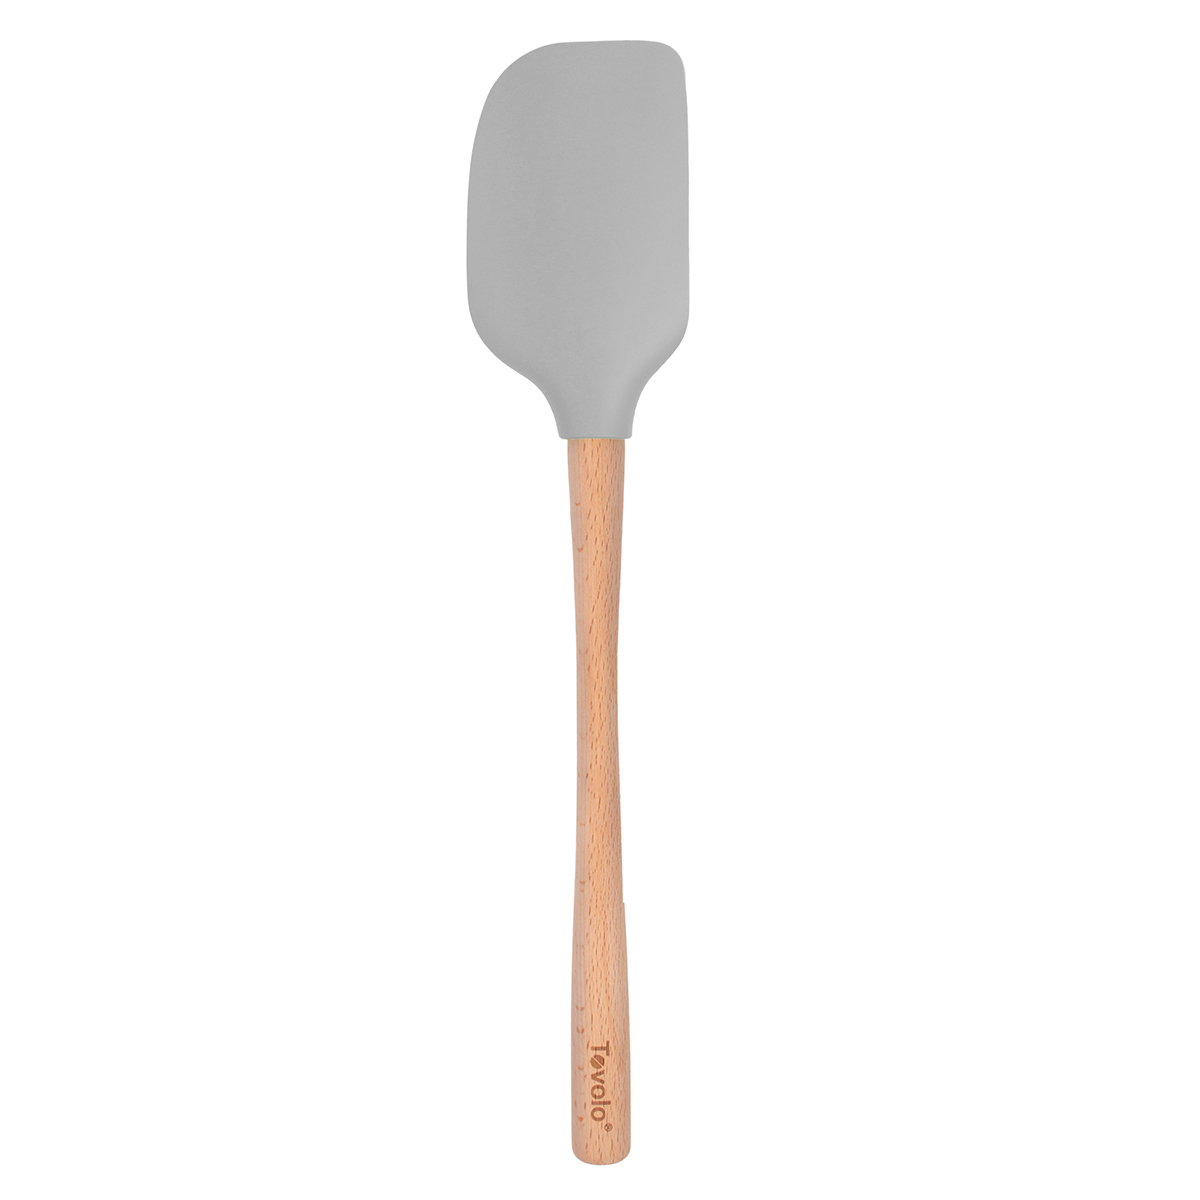 https://www.containerstore.com/catalogimages/423653/10086201-Flex-Core-Wood-Handled-Spat.jpg